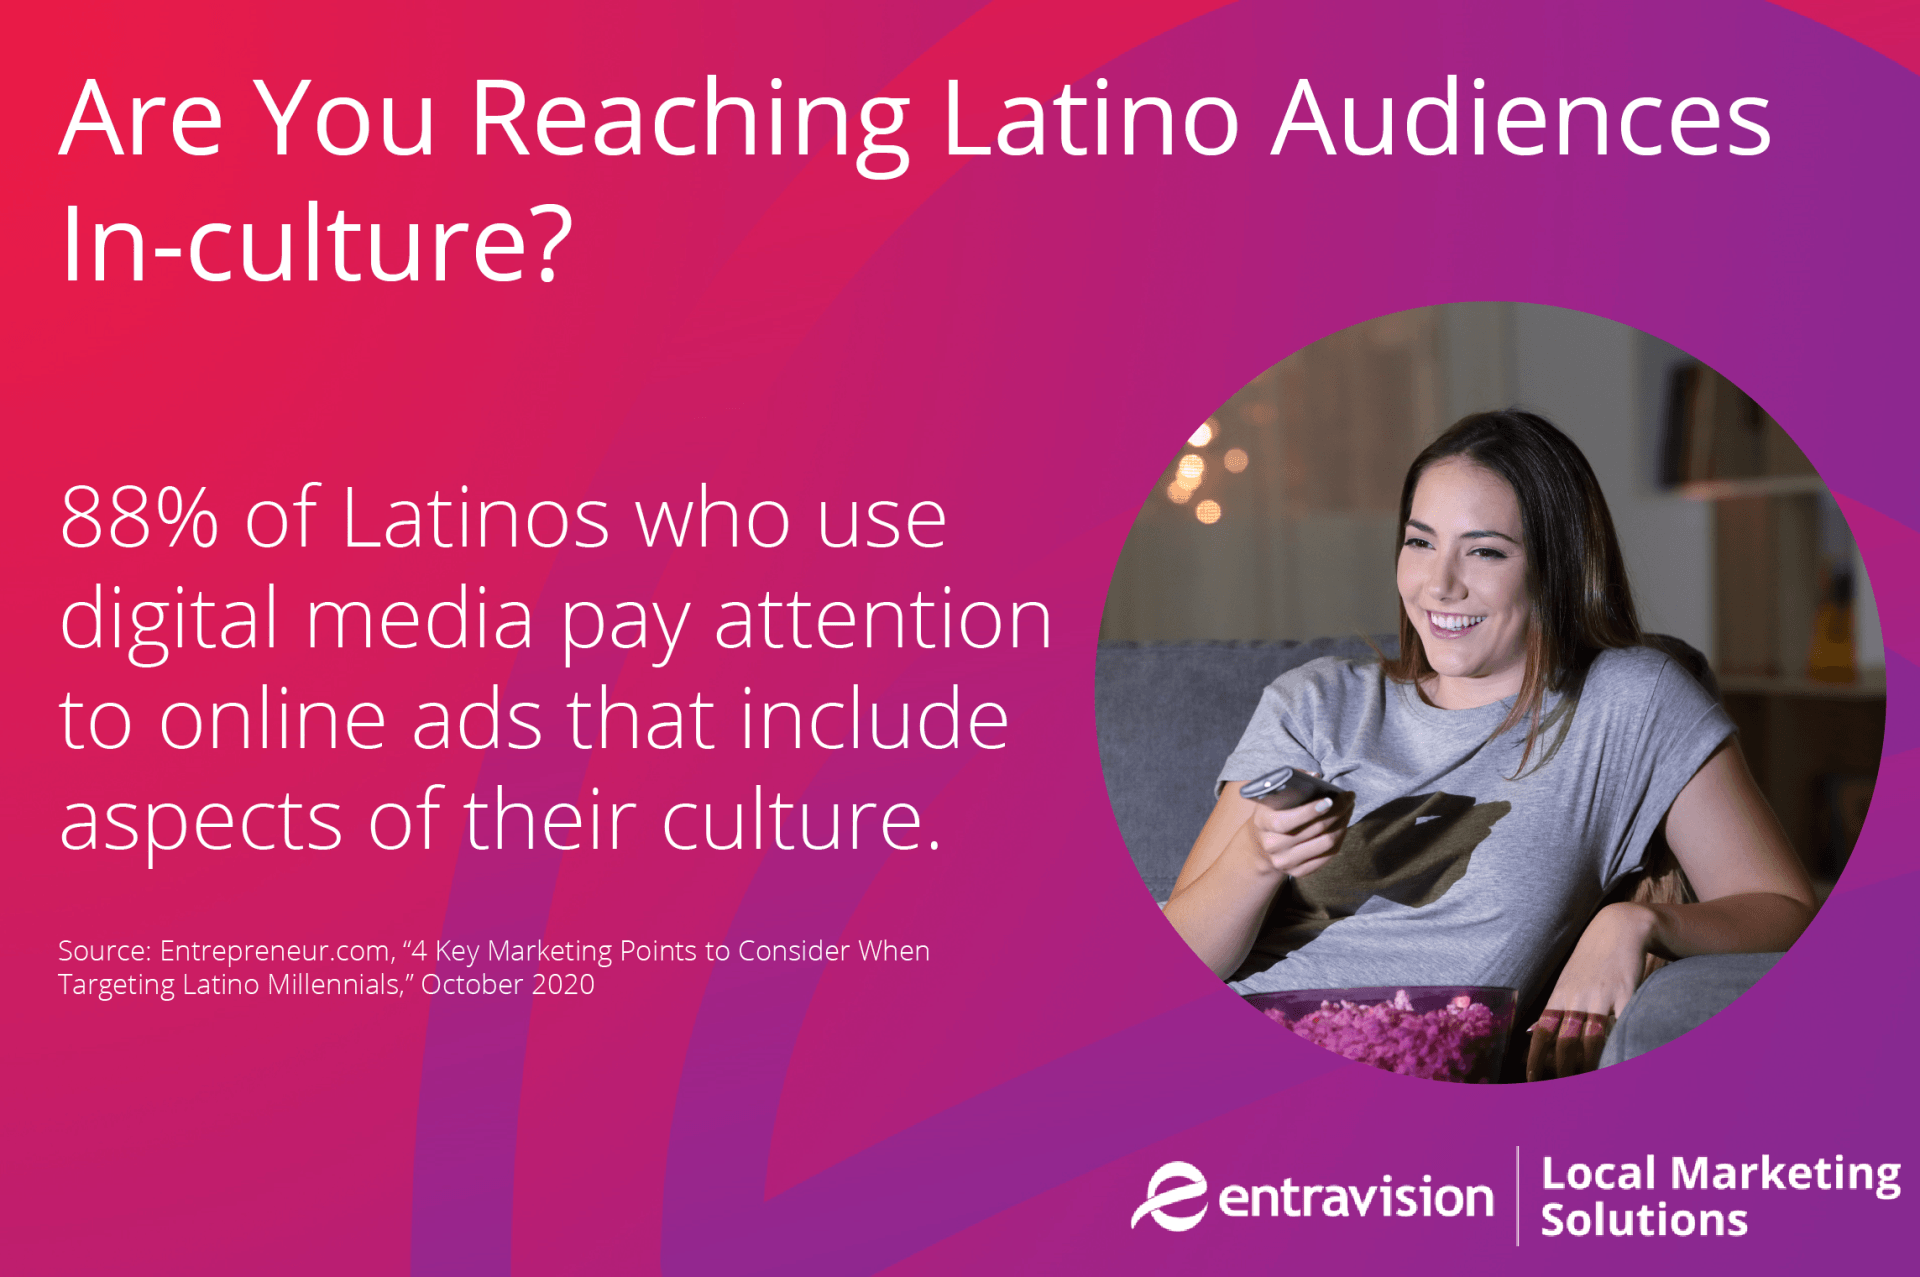 Reaching Latino audiences via in-culture Hispanic marketing is key to winning their business.